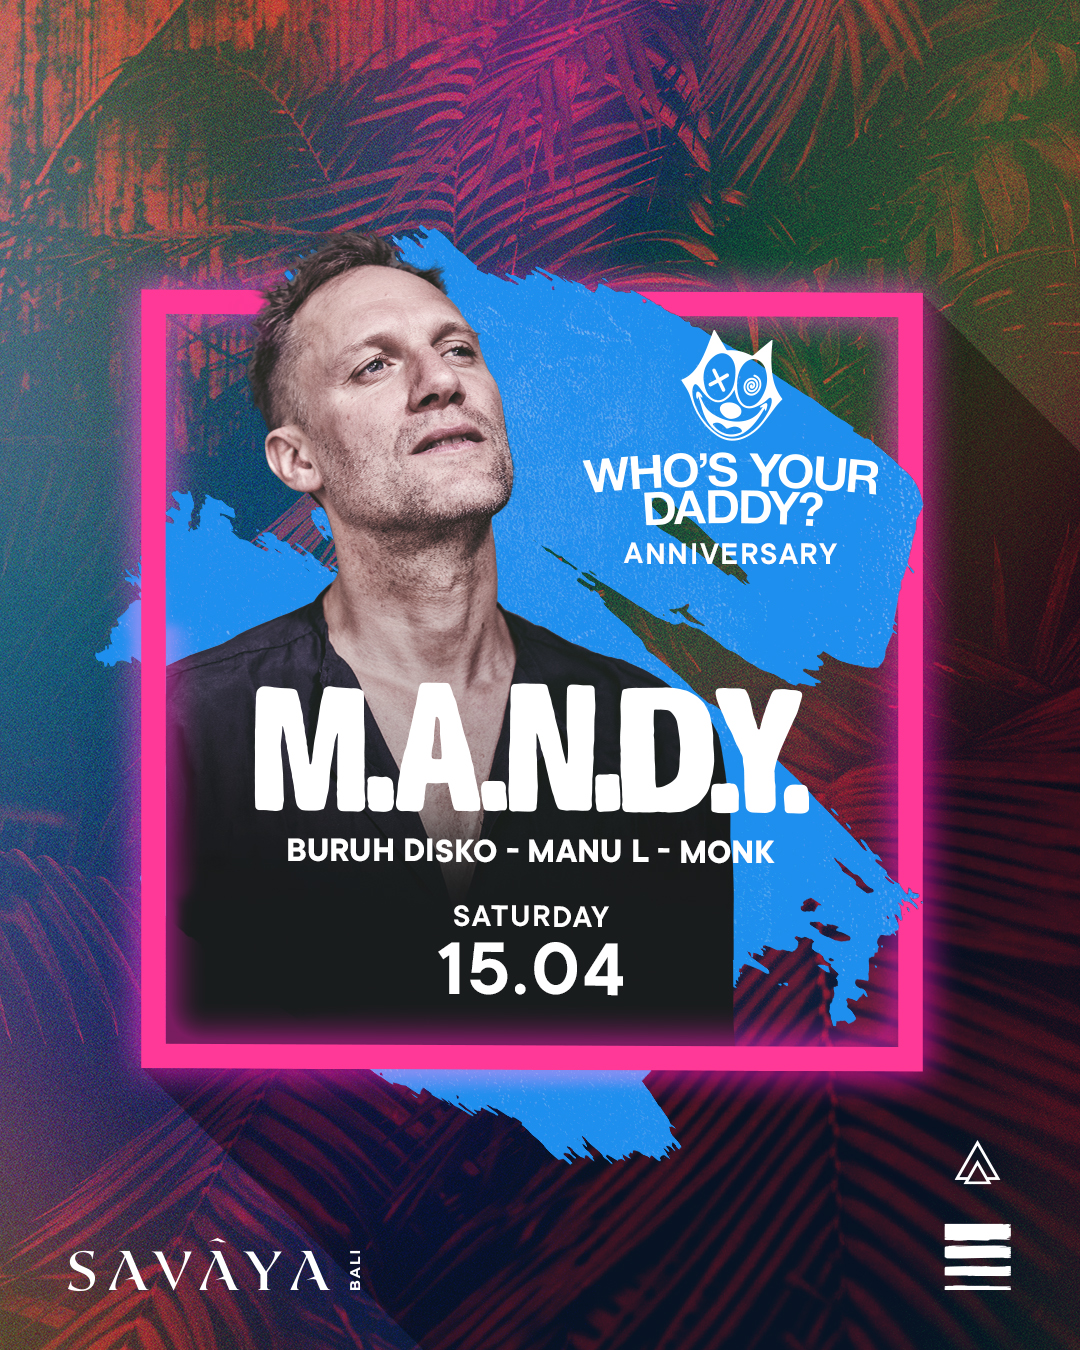 WHO’S YOUR DADDY? TAKEOVER AT SAVAYA PRESENTS M.A.N.D.Y. – SATURDAY APRIL 15TH thumbnail image